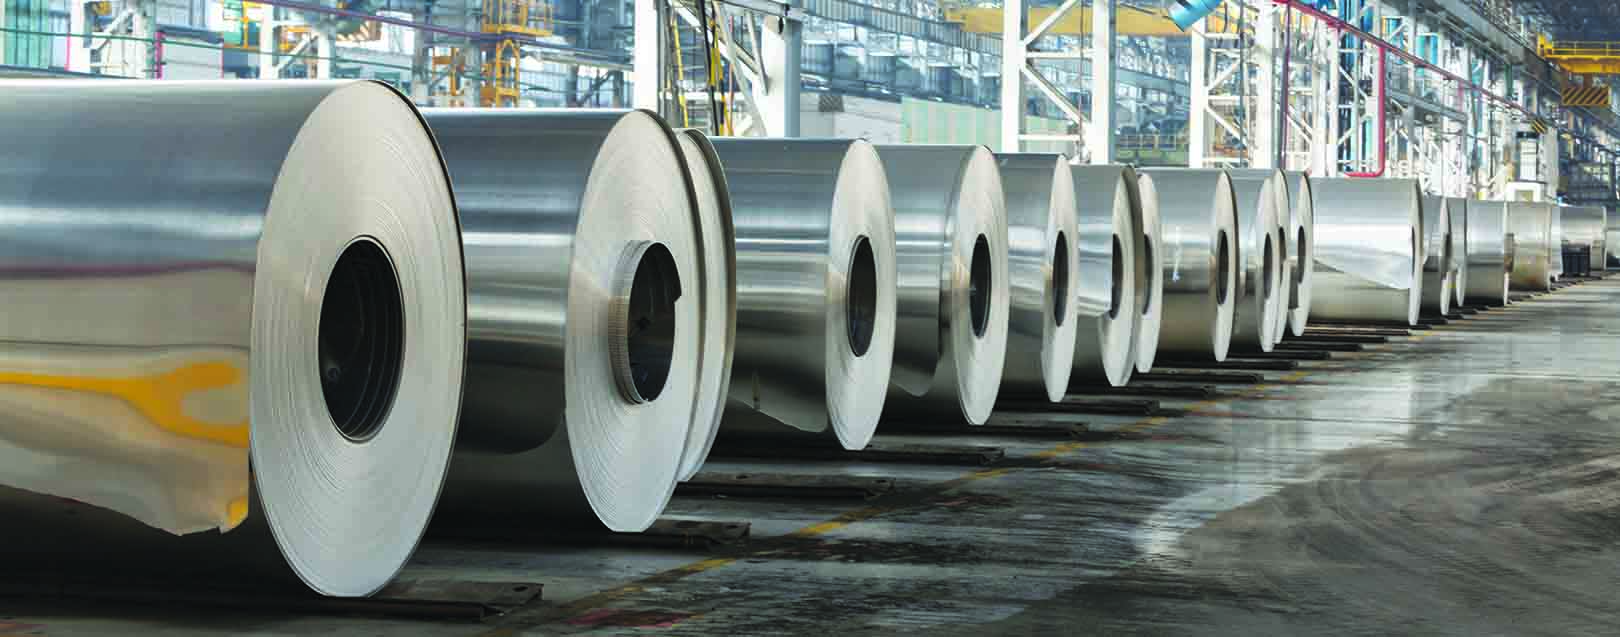 Safeguard Duty On Steel Imports - Prevention Worse Than Cure? March 2018 issue